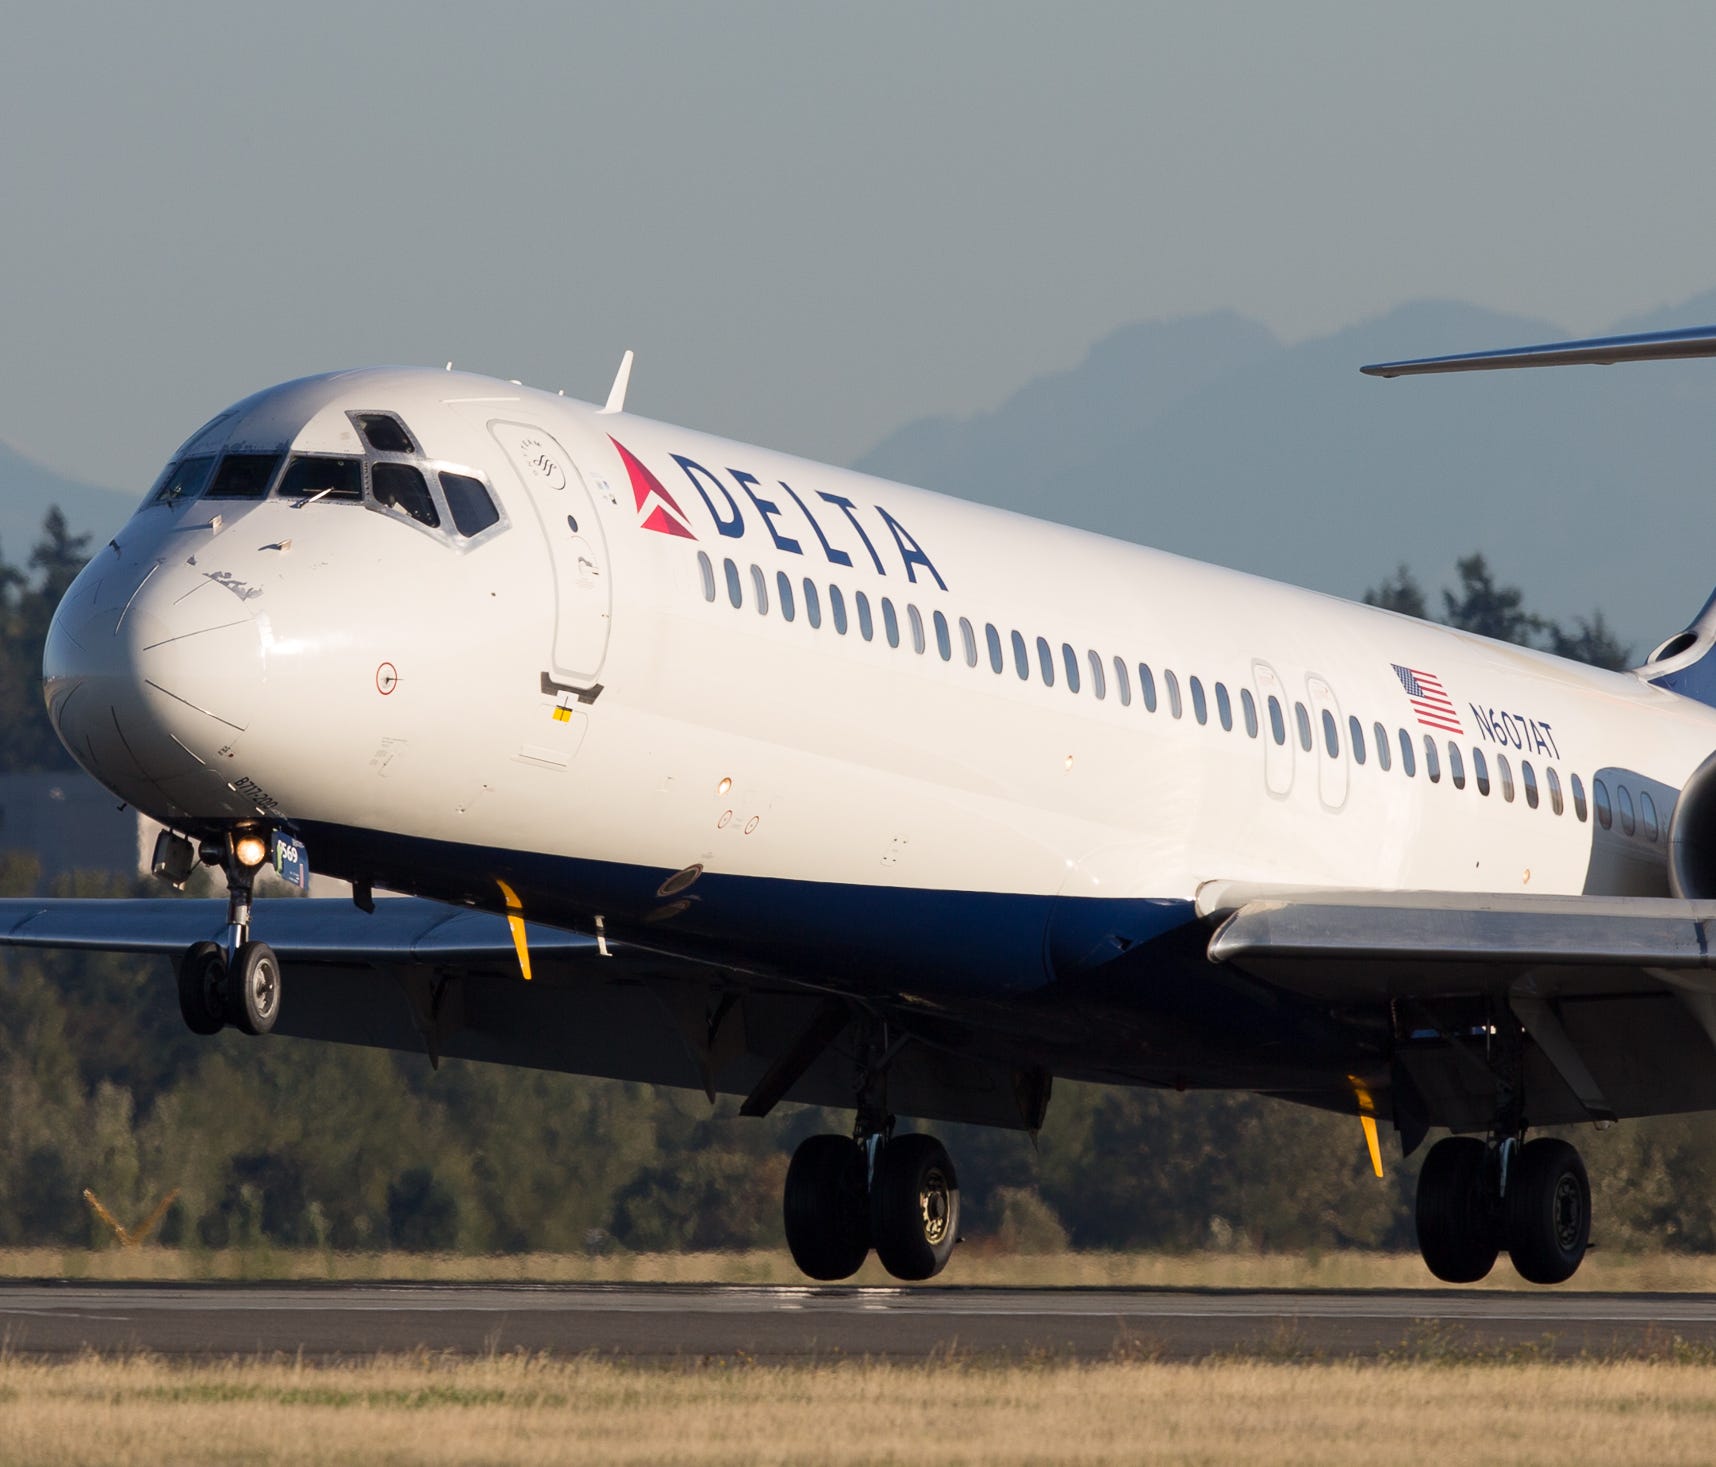 A Delta Air Lines Boeing 717 aircraft is seen at Seattle-Tacoma International Airport on Sept. 27, 2015